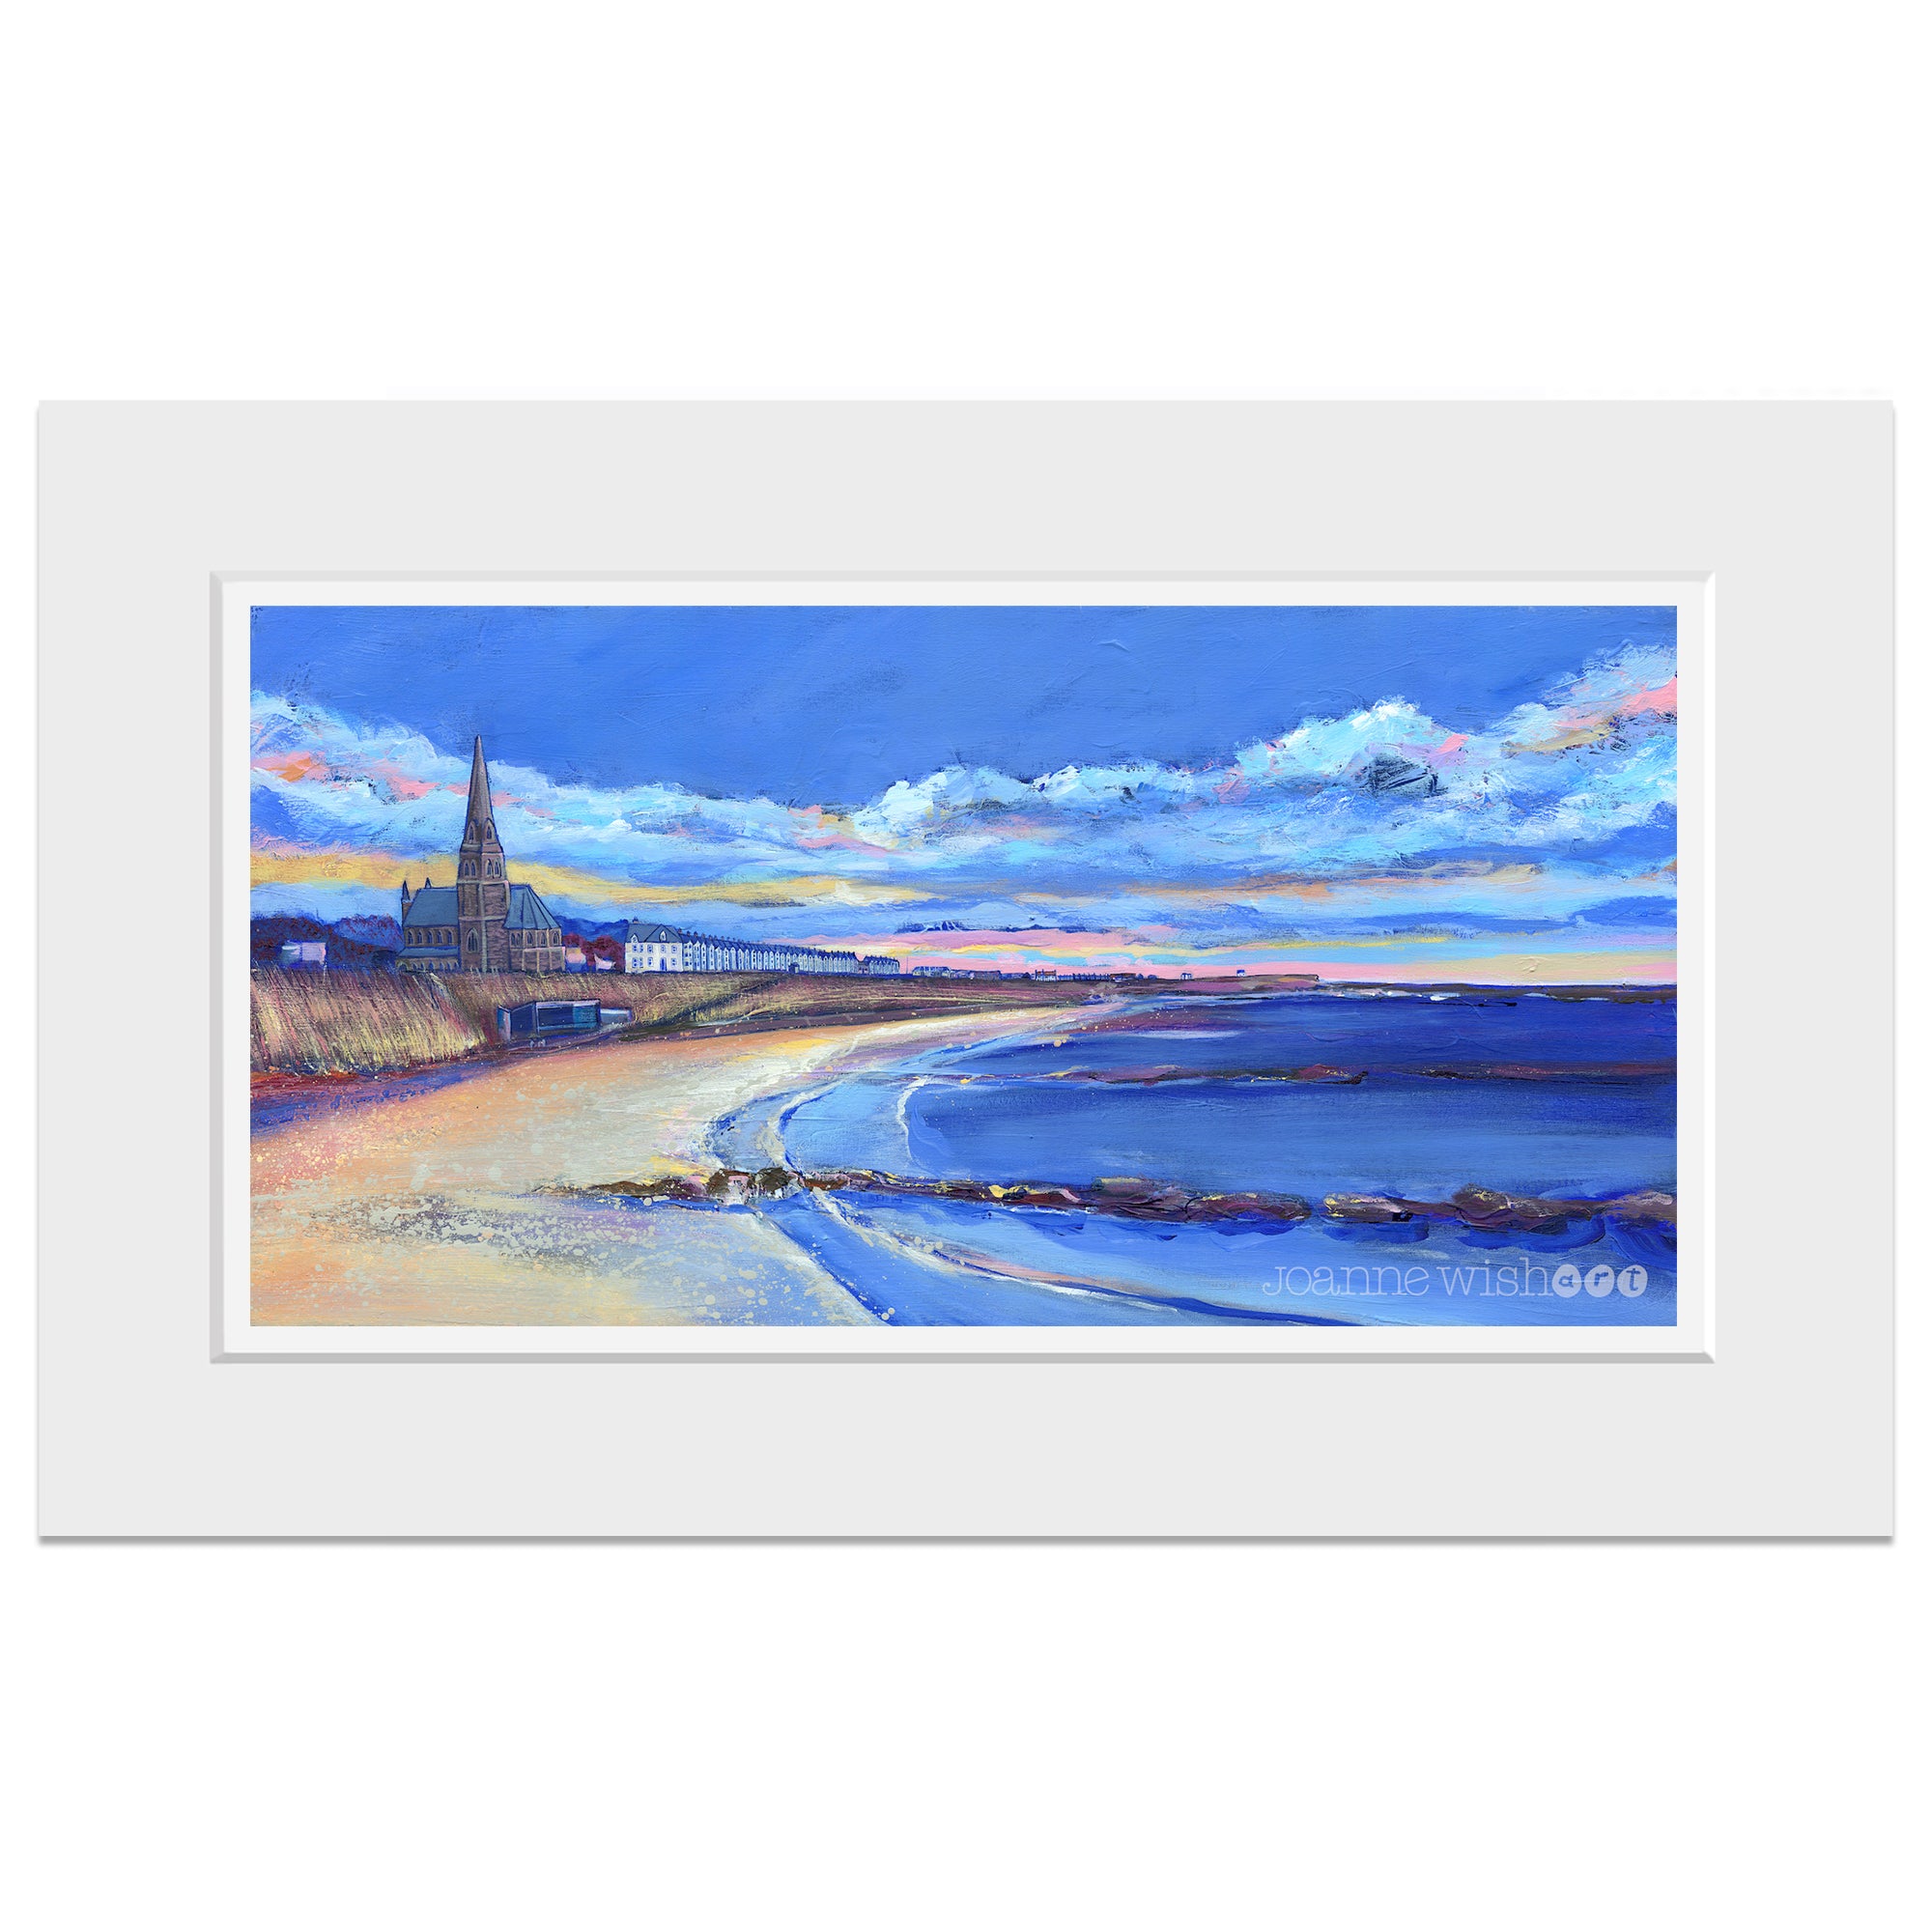 A mounted print of St Georges Church featuring Longhands beach and a warm glowing skyline.